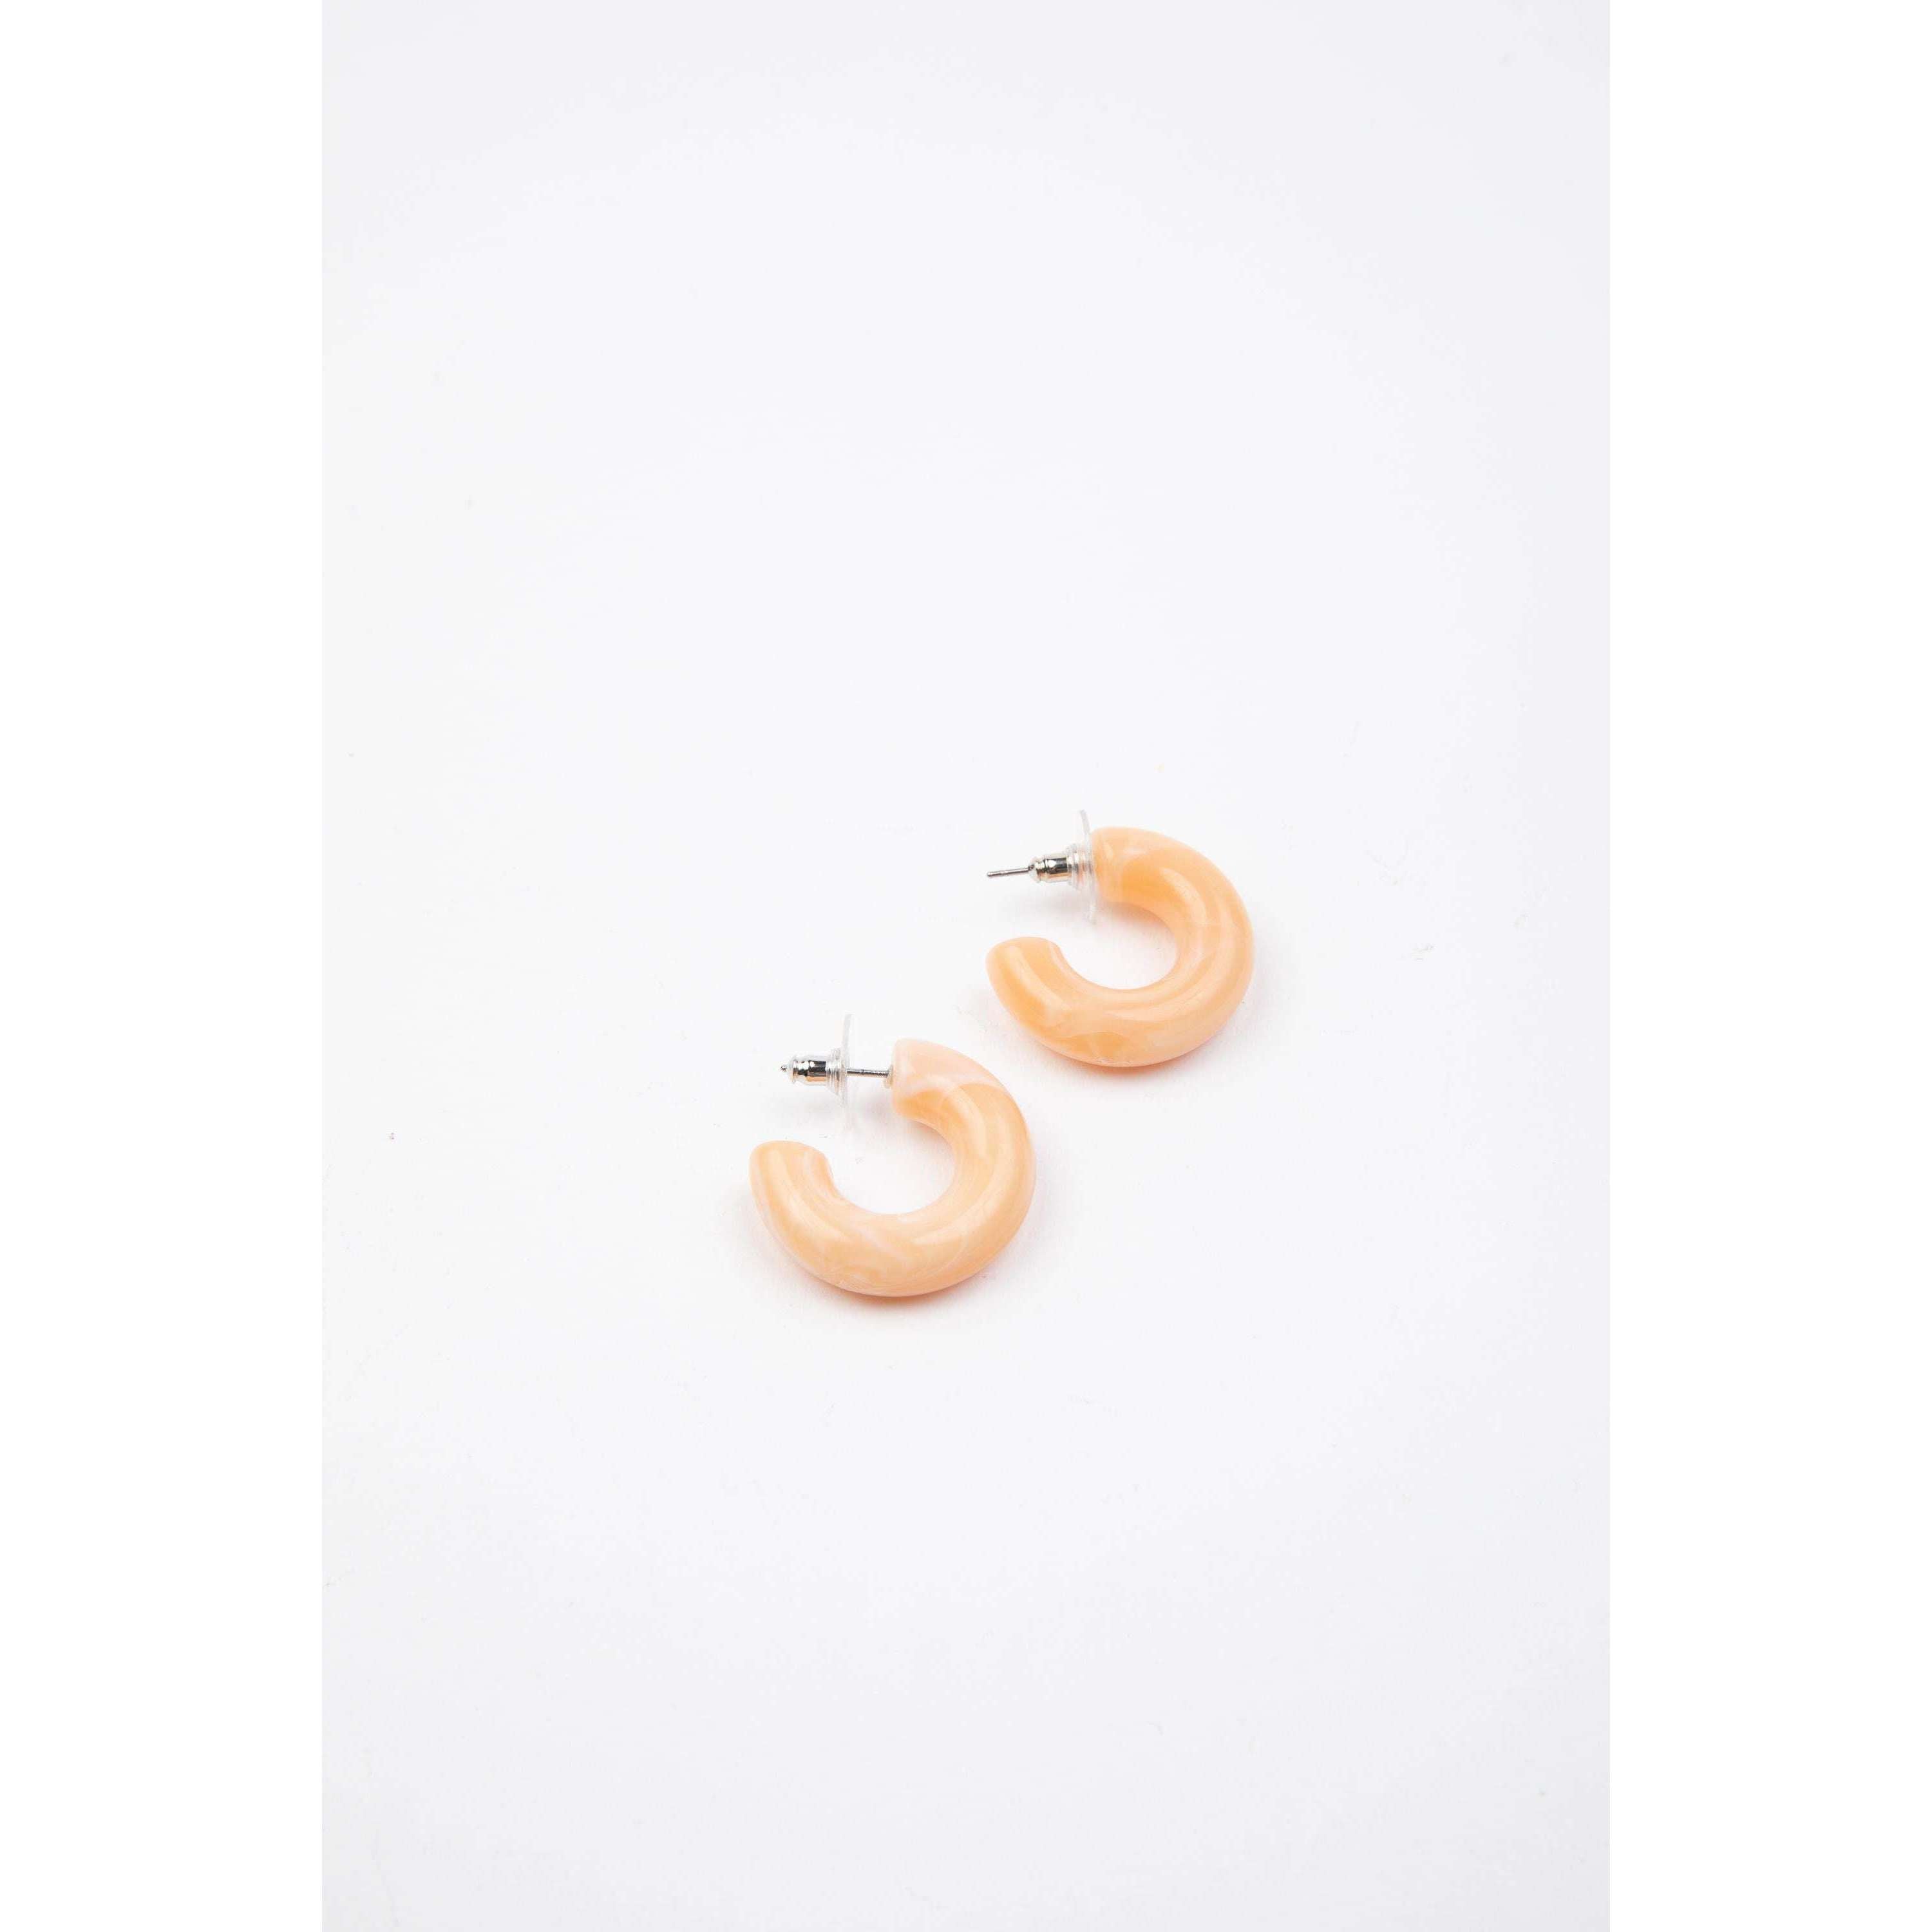 Impodimo Living & Giving:Constance Earrings:Holiday Trading & Co:Melon